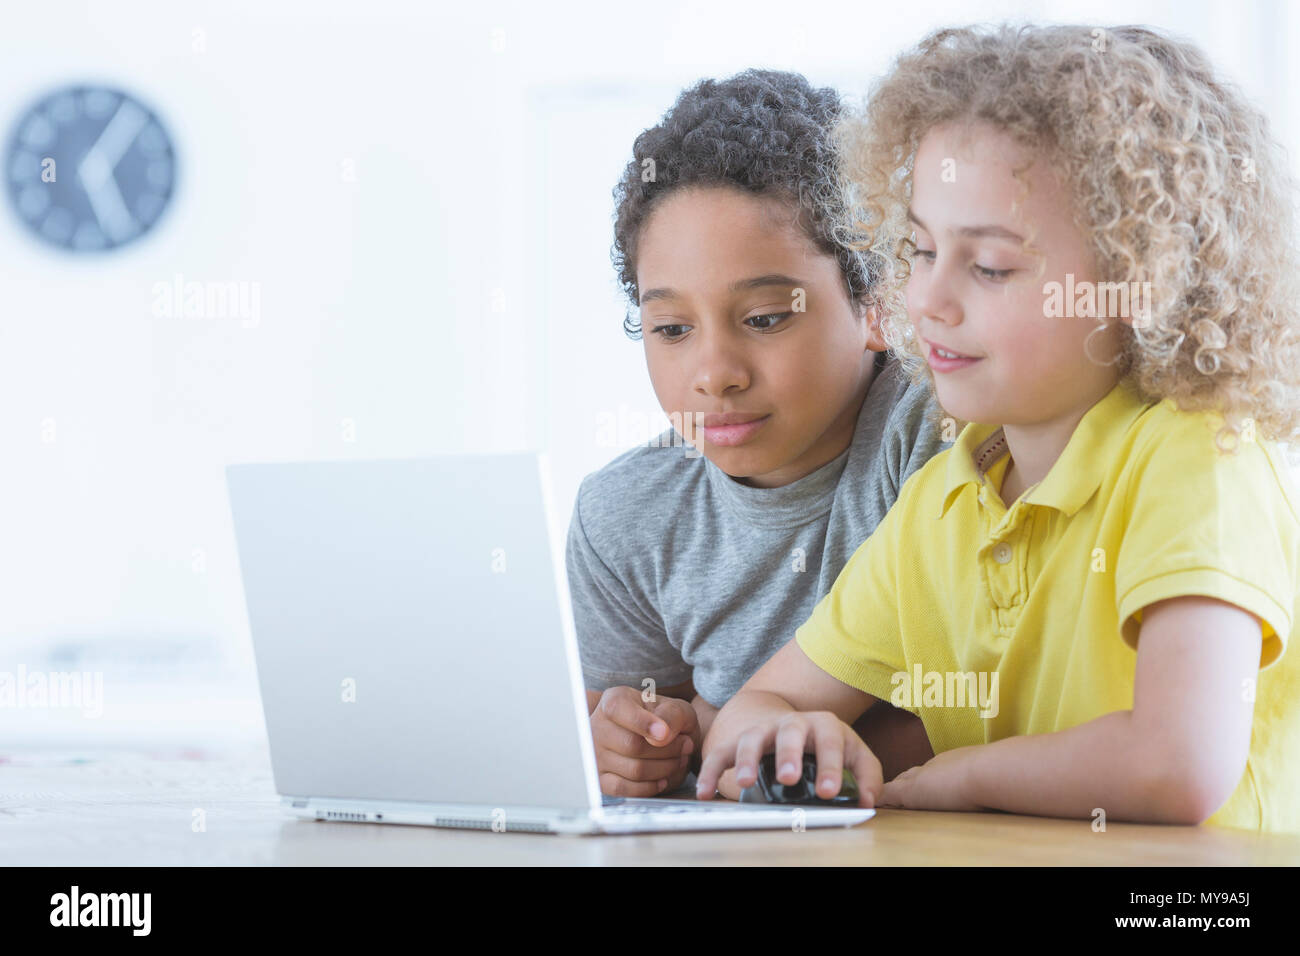 Afro-american boy looks at his friend who is programming using laptop, multicultural school concept Stock Photo